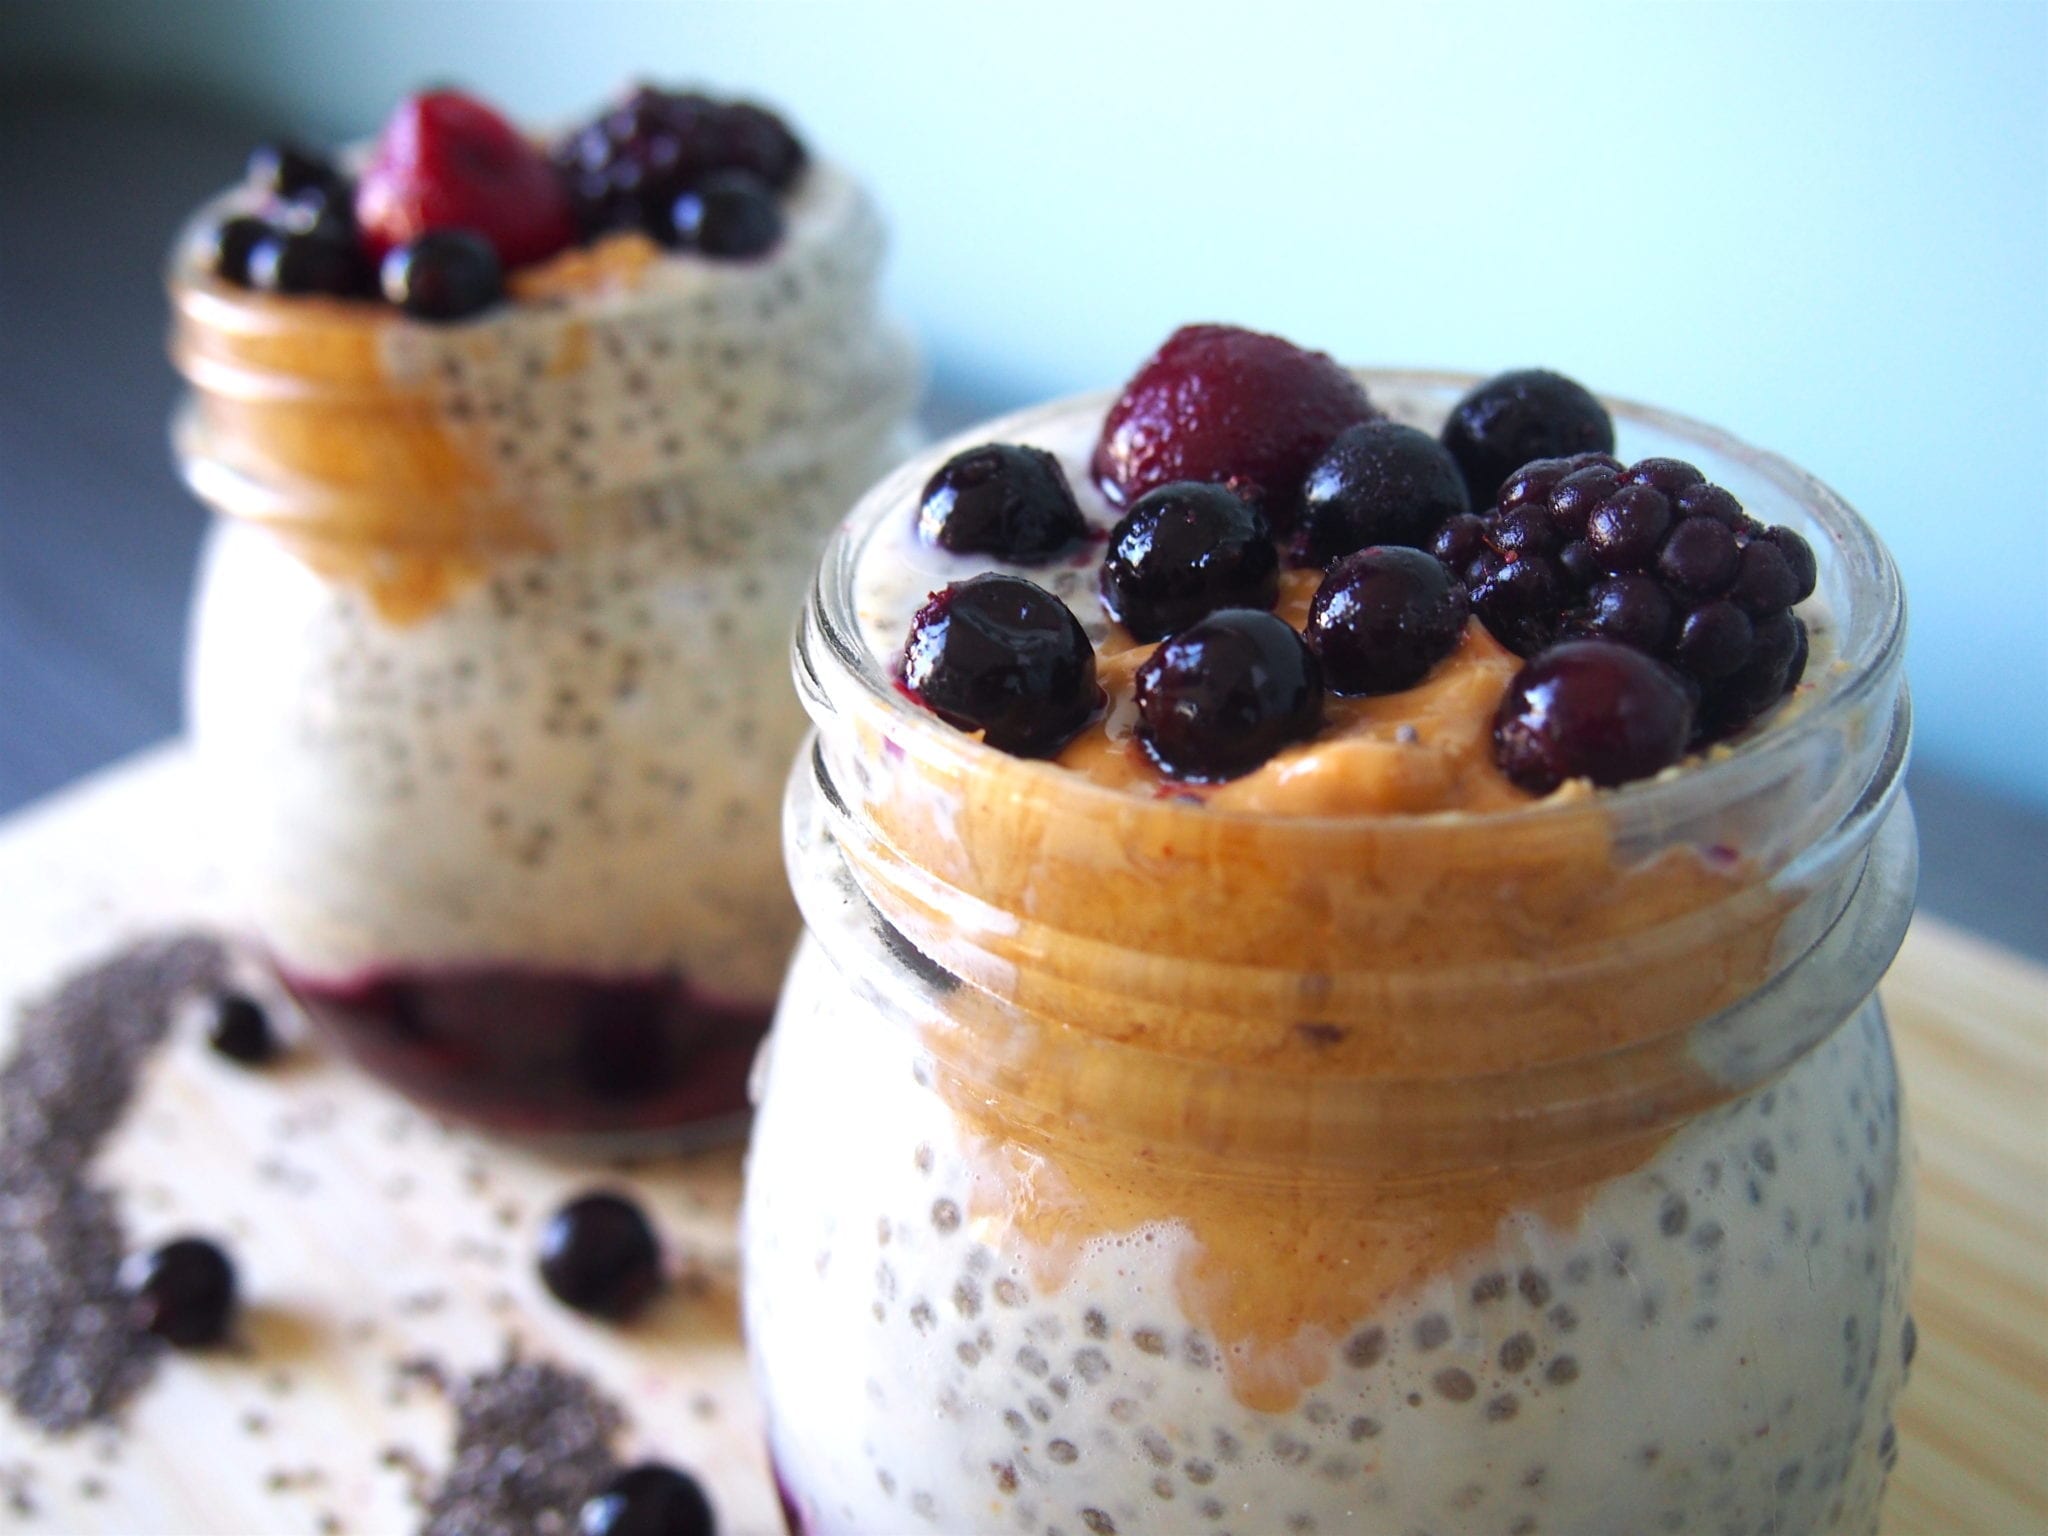 Peanut Butter Berry Chia Pudding